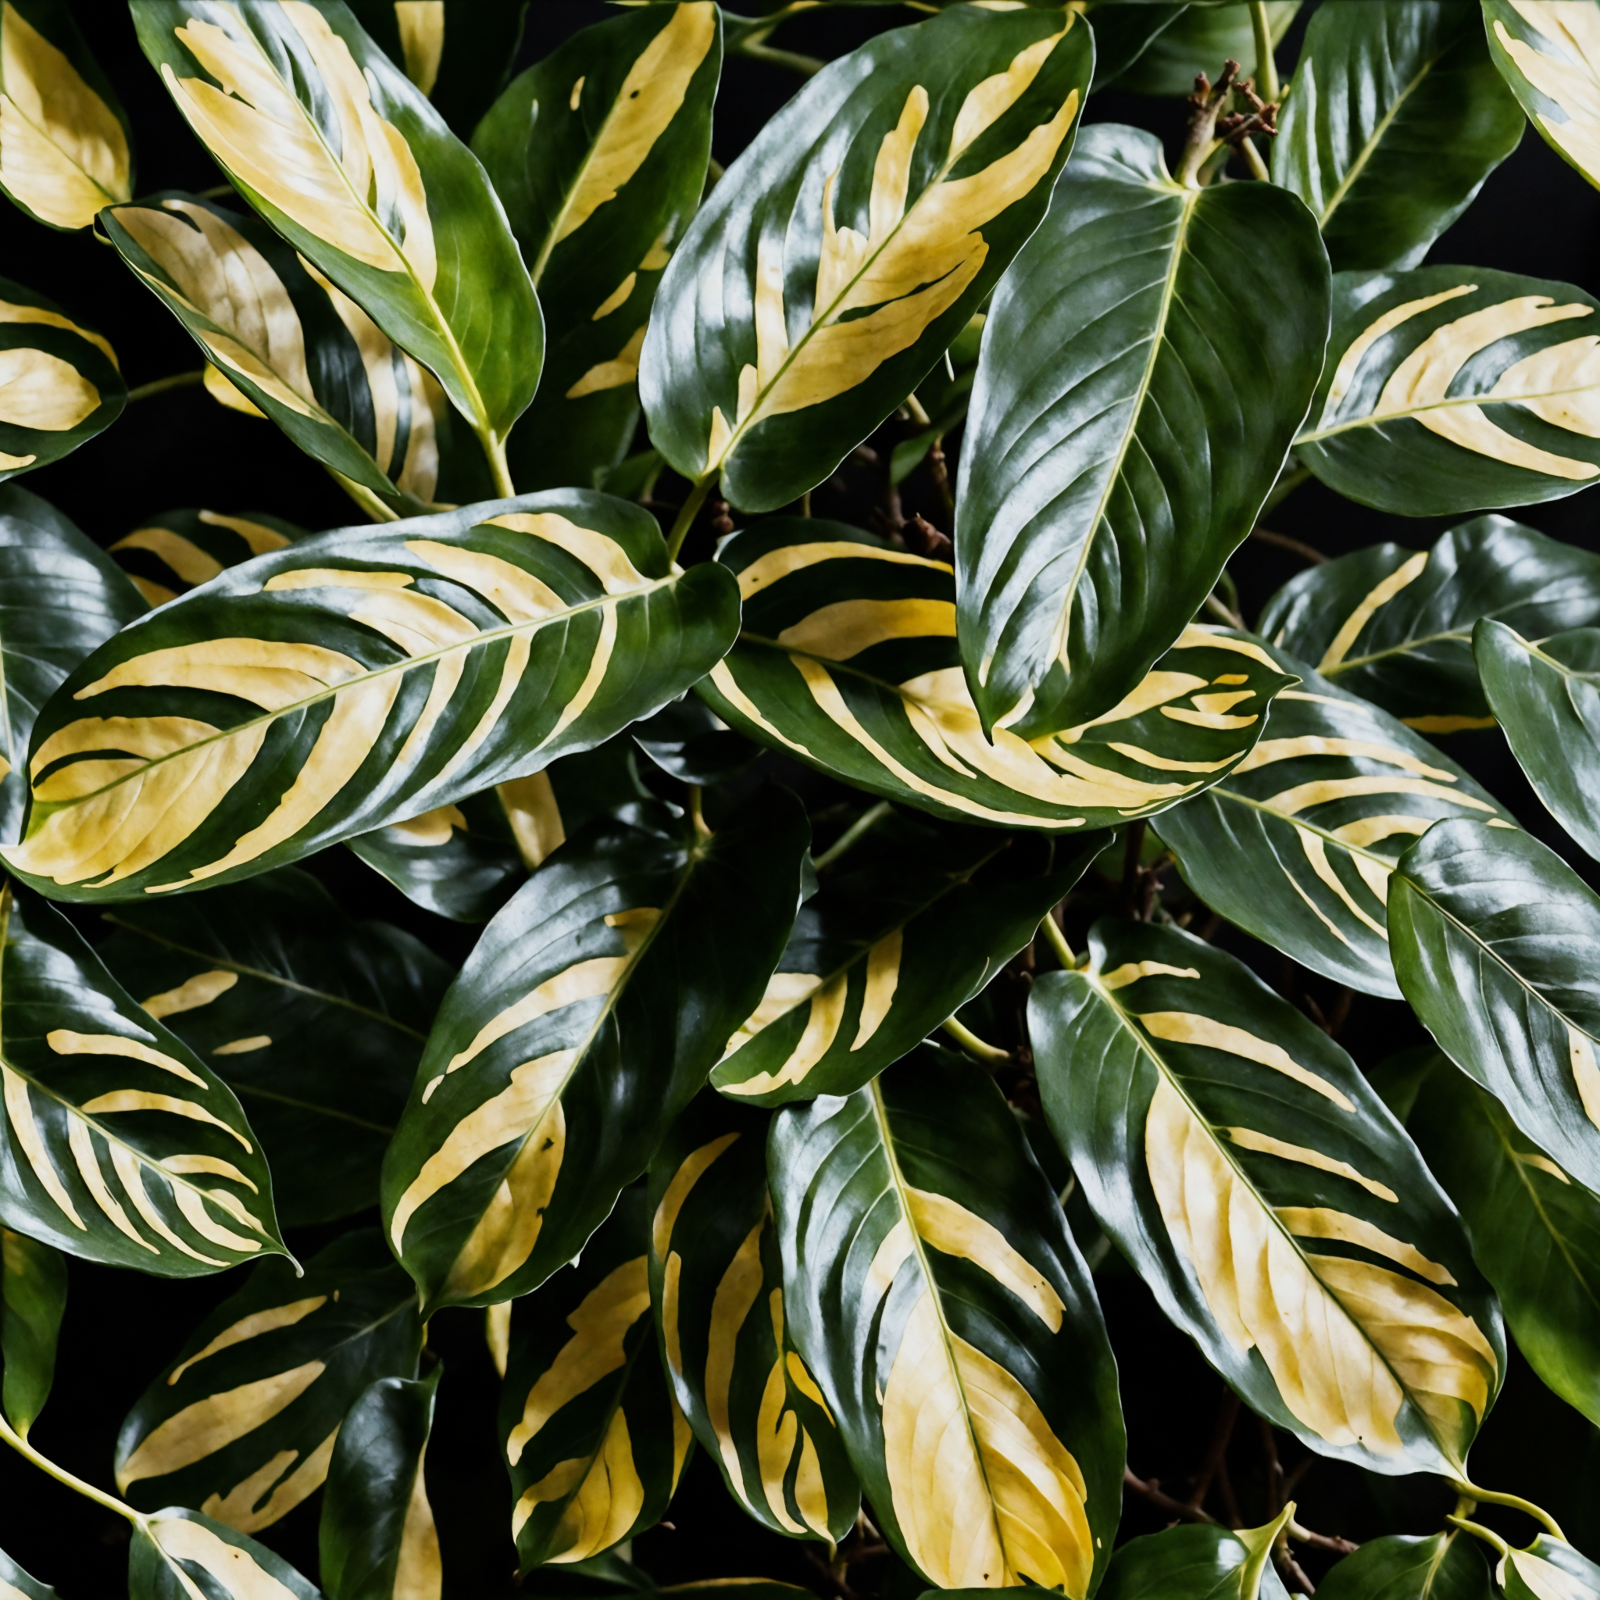 Ctenanthe lubbersiana with variegated leaves in a planter, clear lighting, against a dark background.